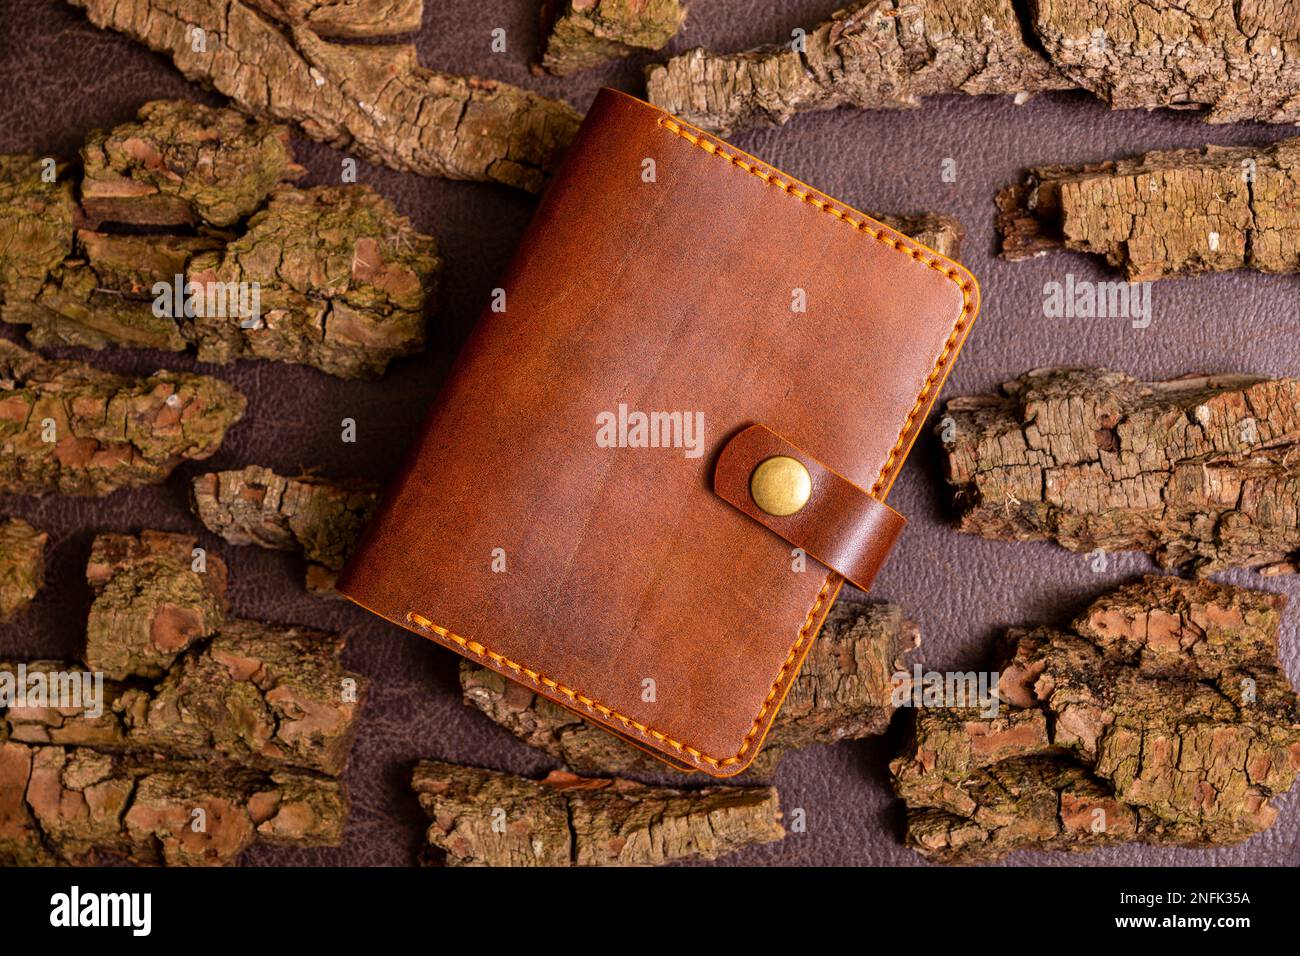 Closed brown mens wallet for cash and credit cards on leather background with pine bark. Stock Photo